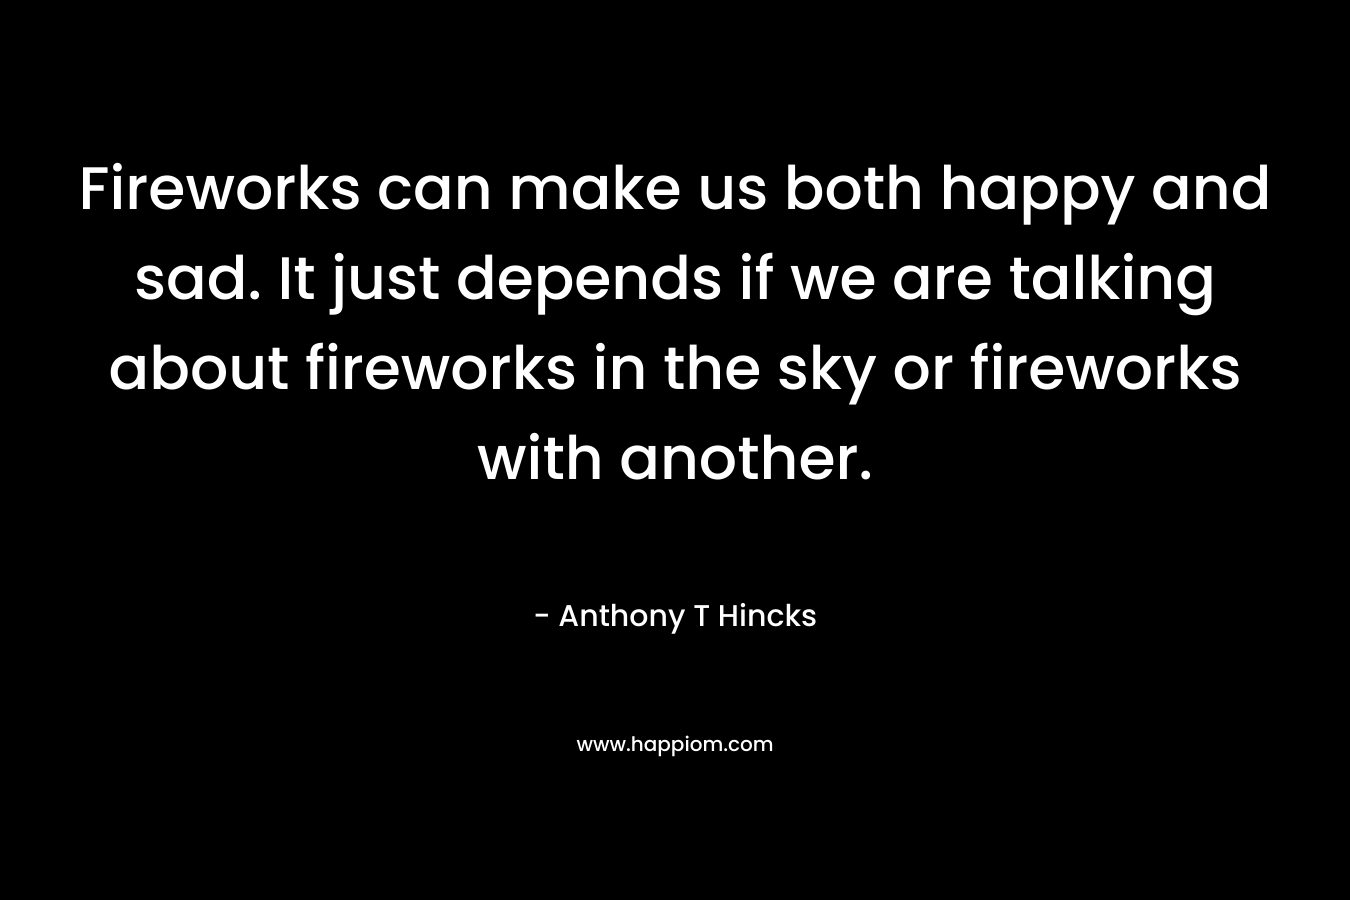 Fireworks can make us both happy and sad. It just depends if we are talking about fireworks in the sky or fireworks with another.